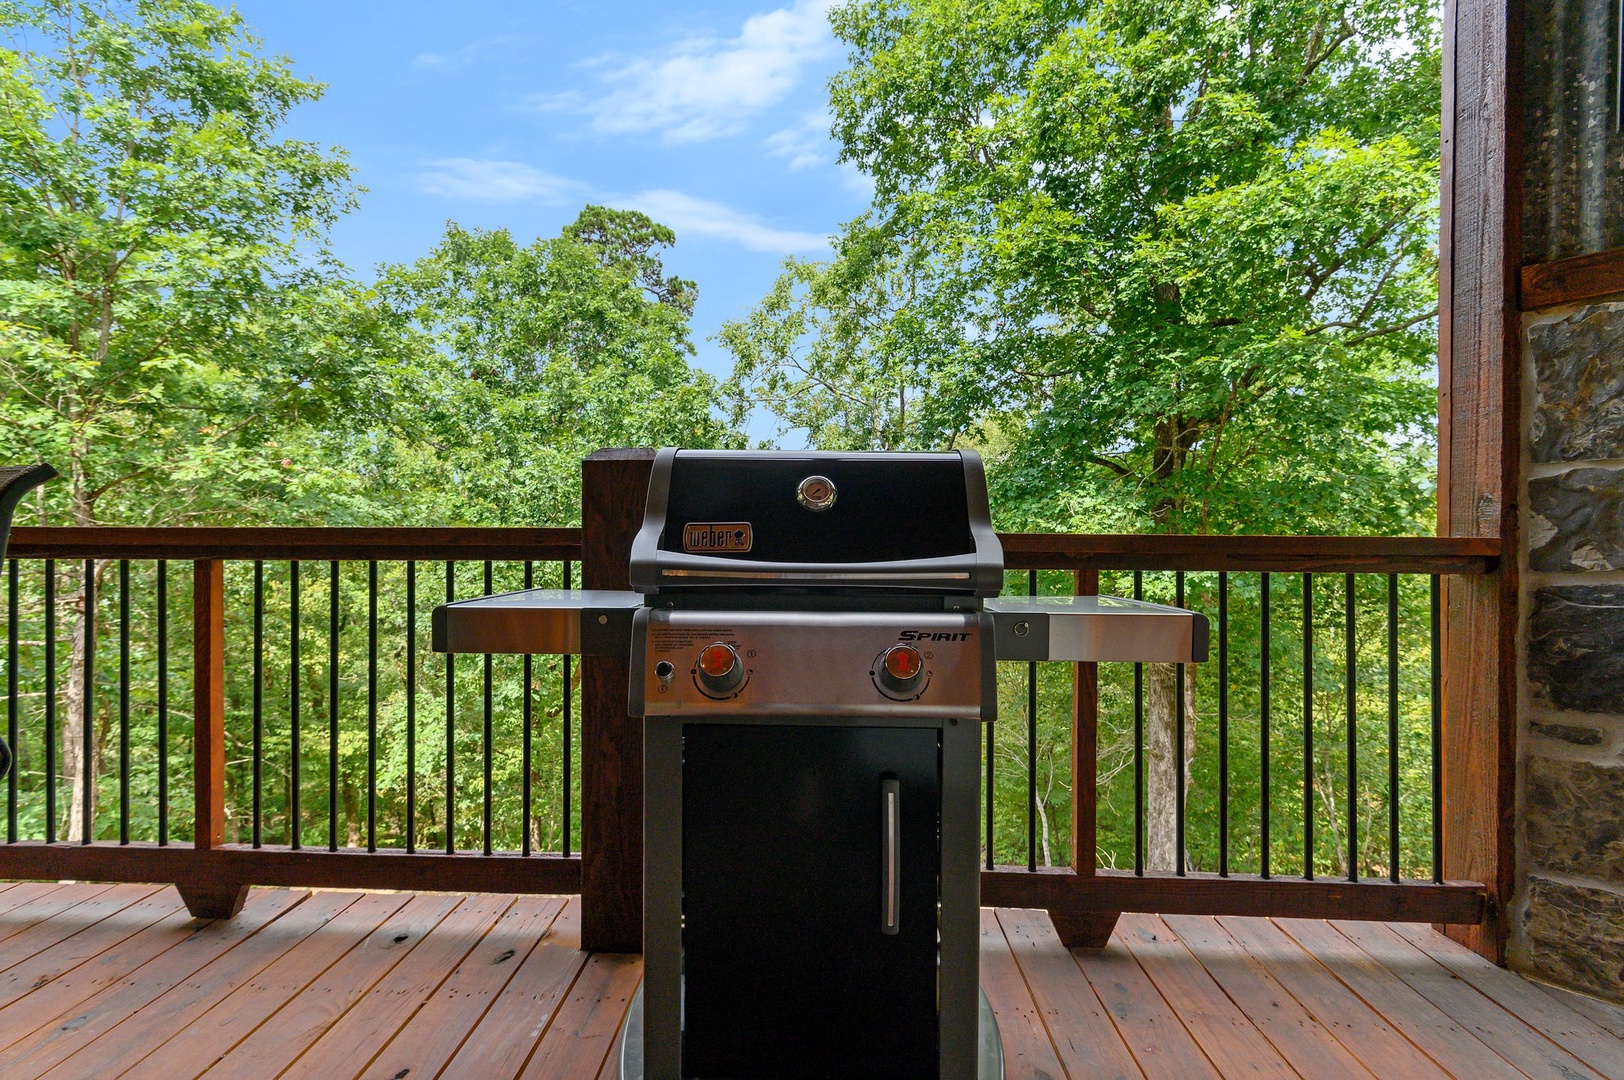 Gas grill for meats and delicious veggies